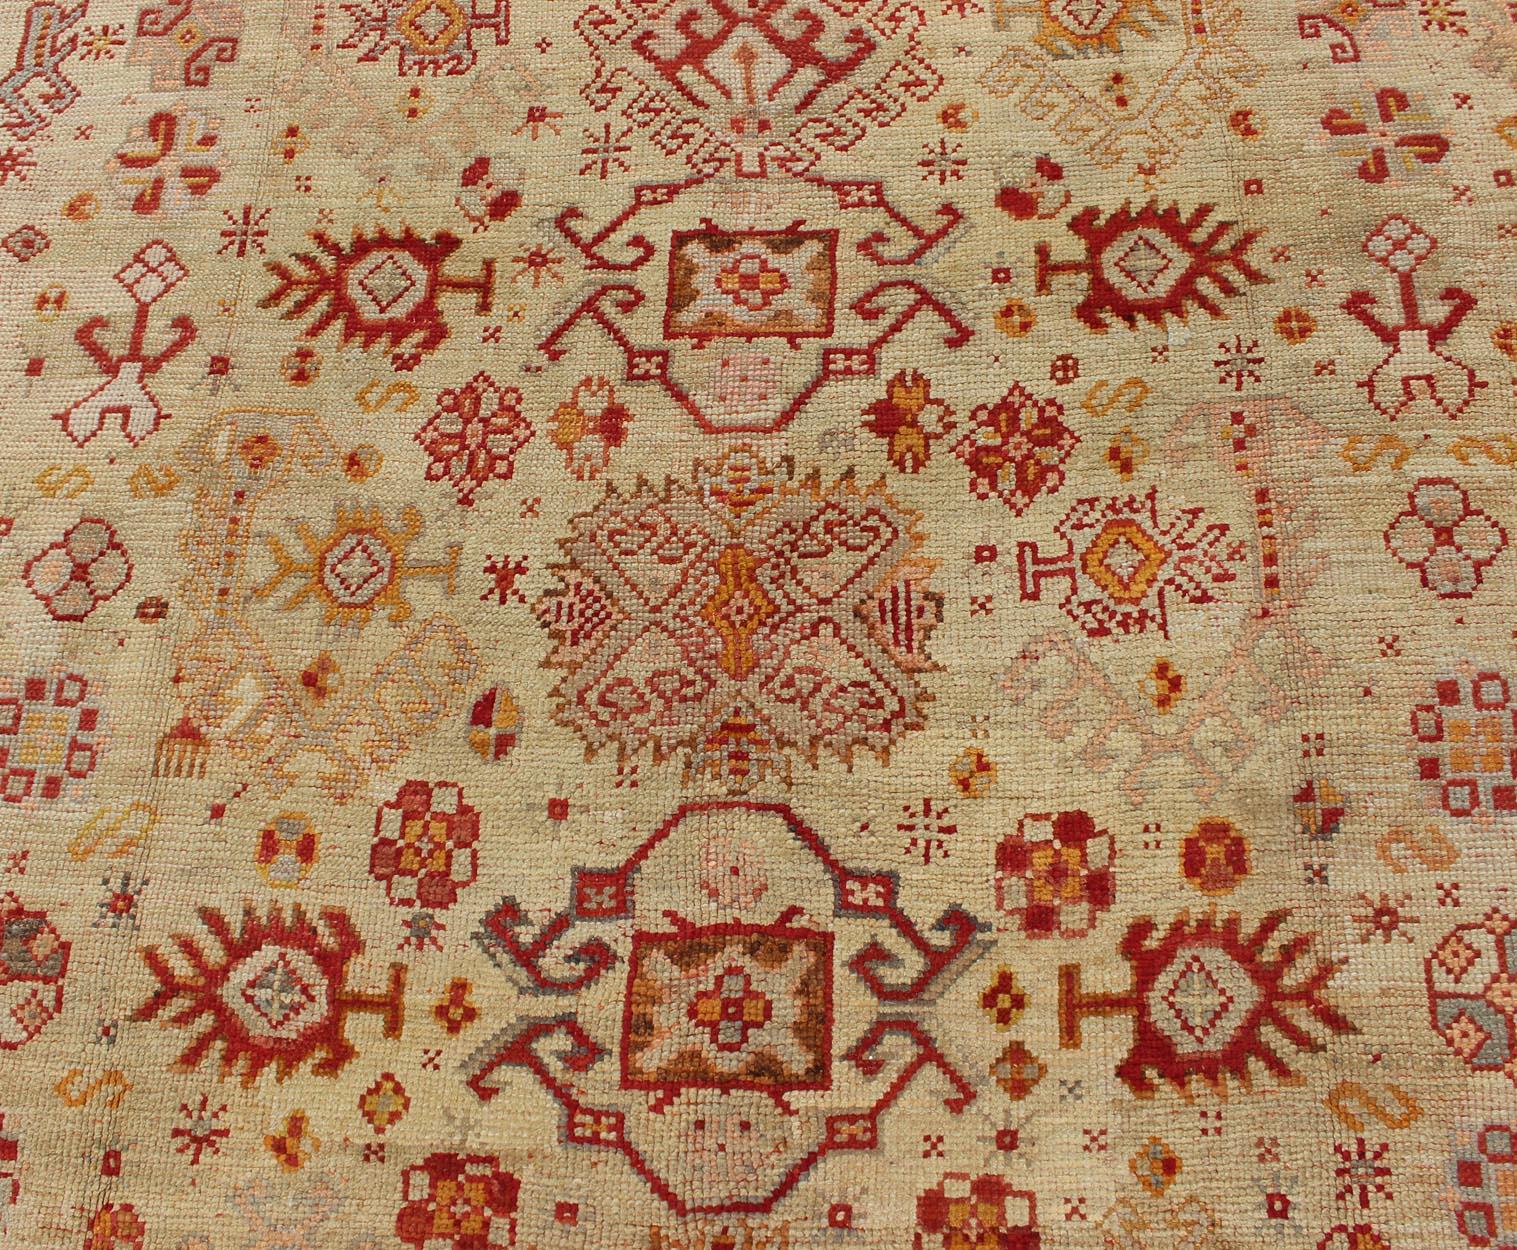 20th Century Antique Turkish Oushak Carpet With All-Over Design In Red, Taupe, and Orange For Sale